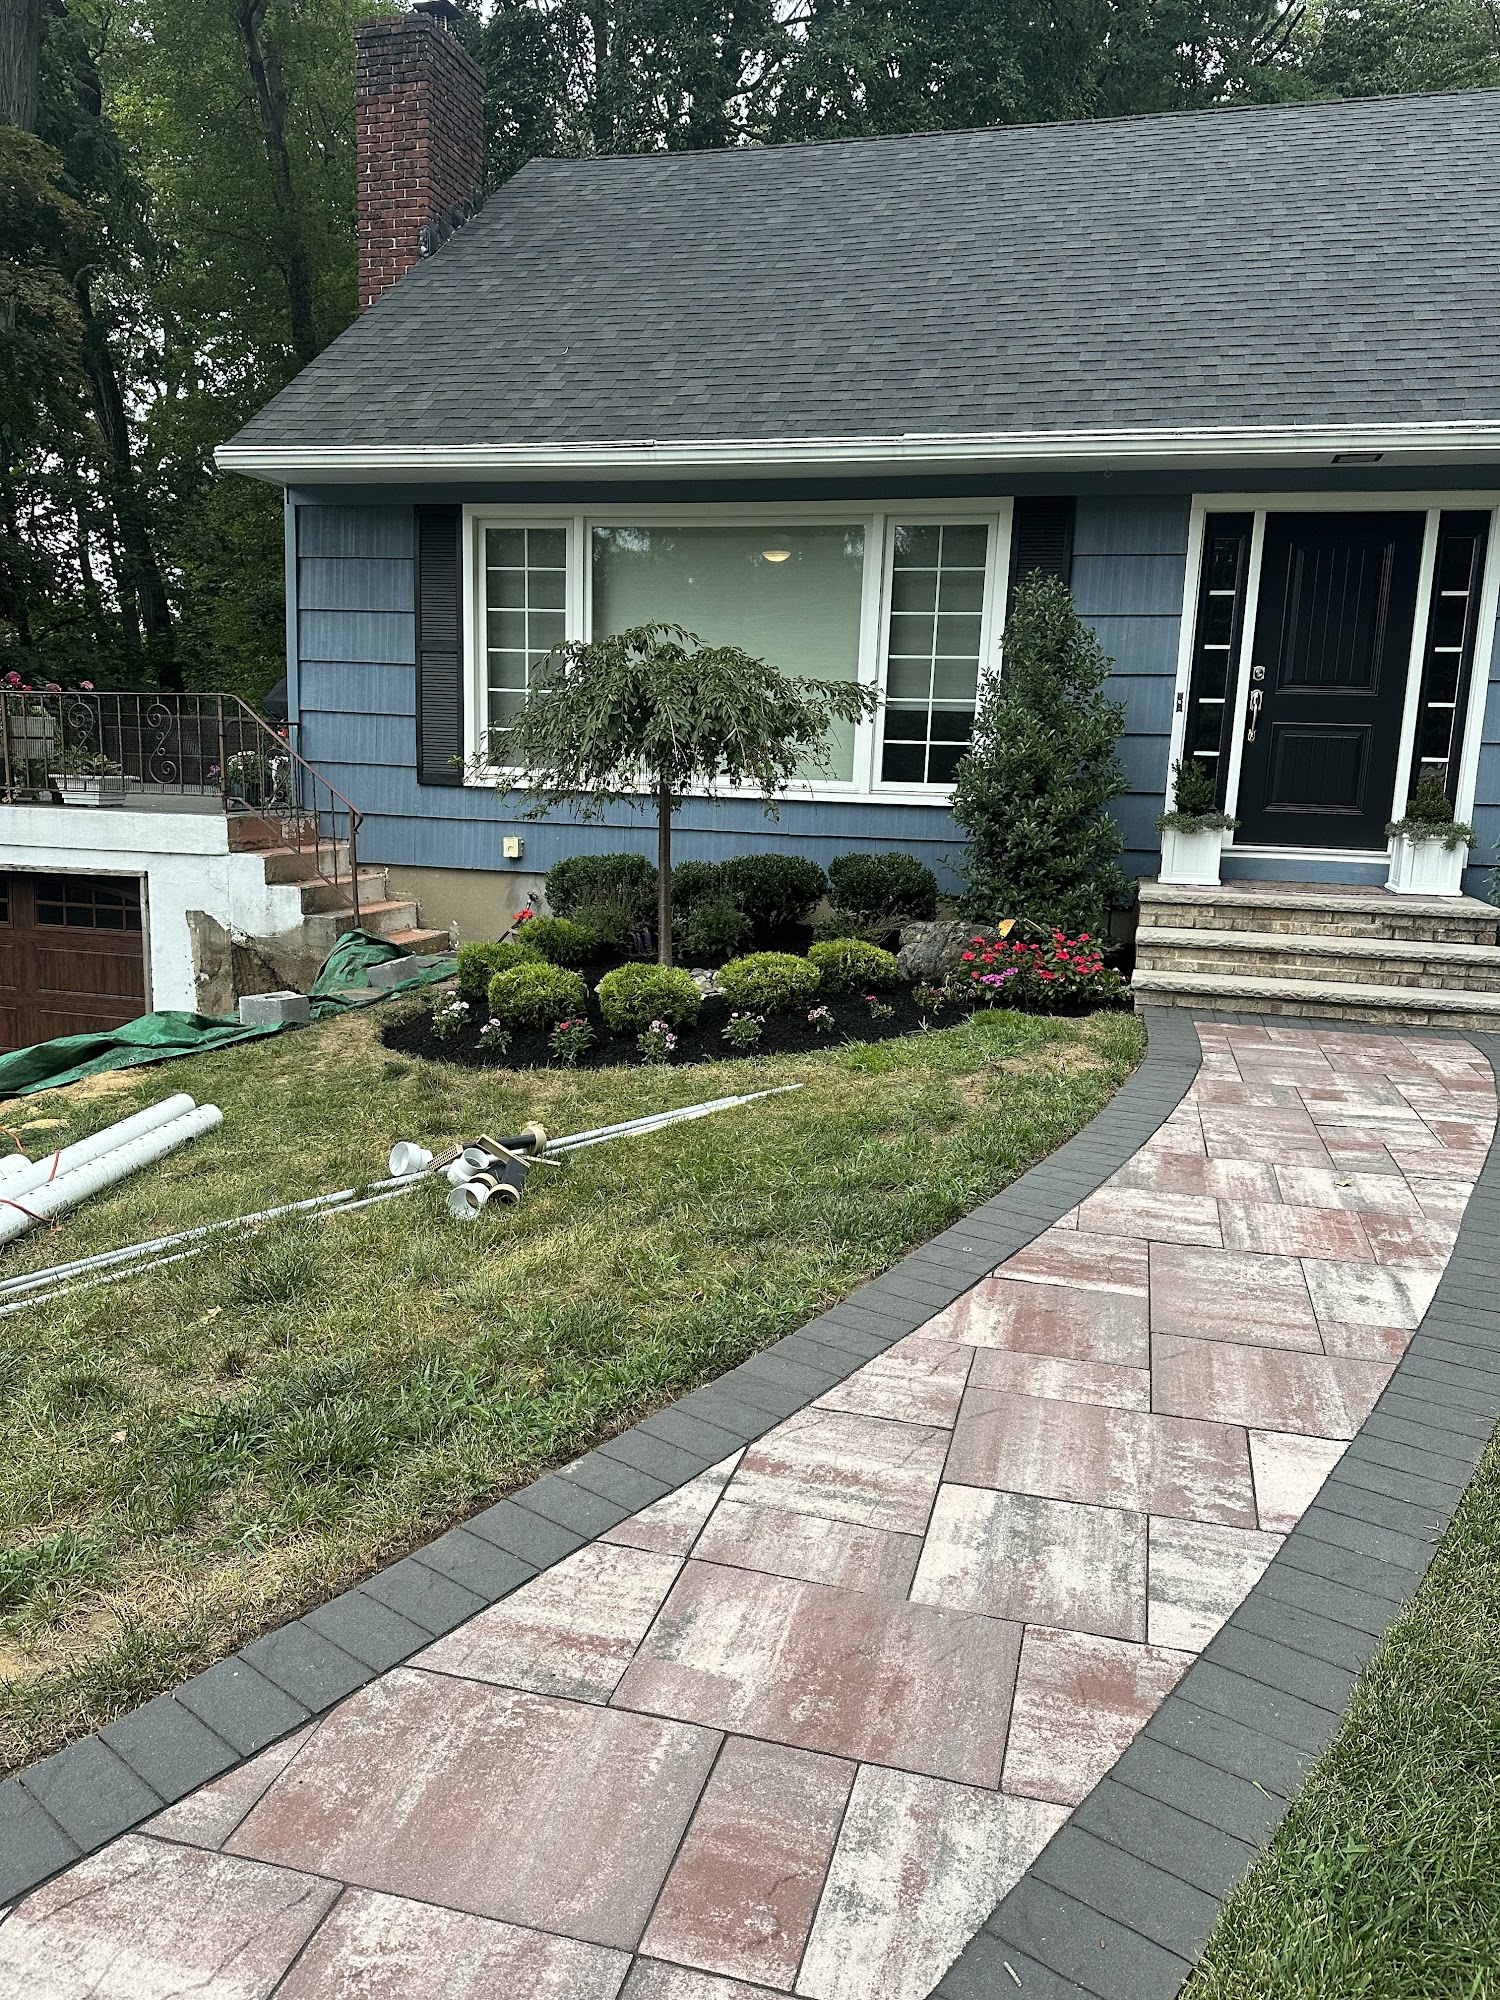 Executive Lawn Care & Landscaping